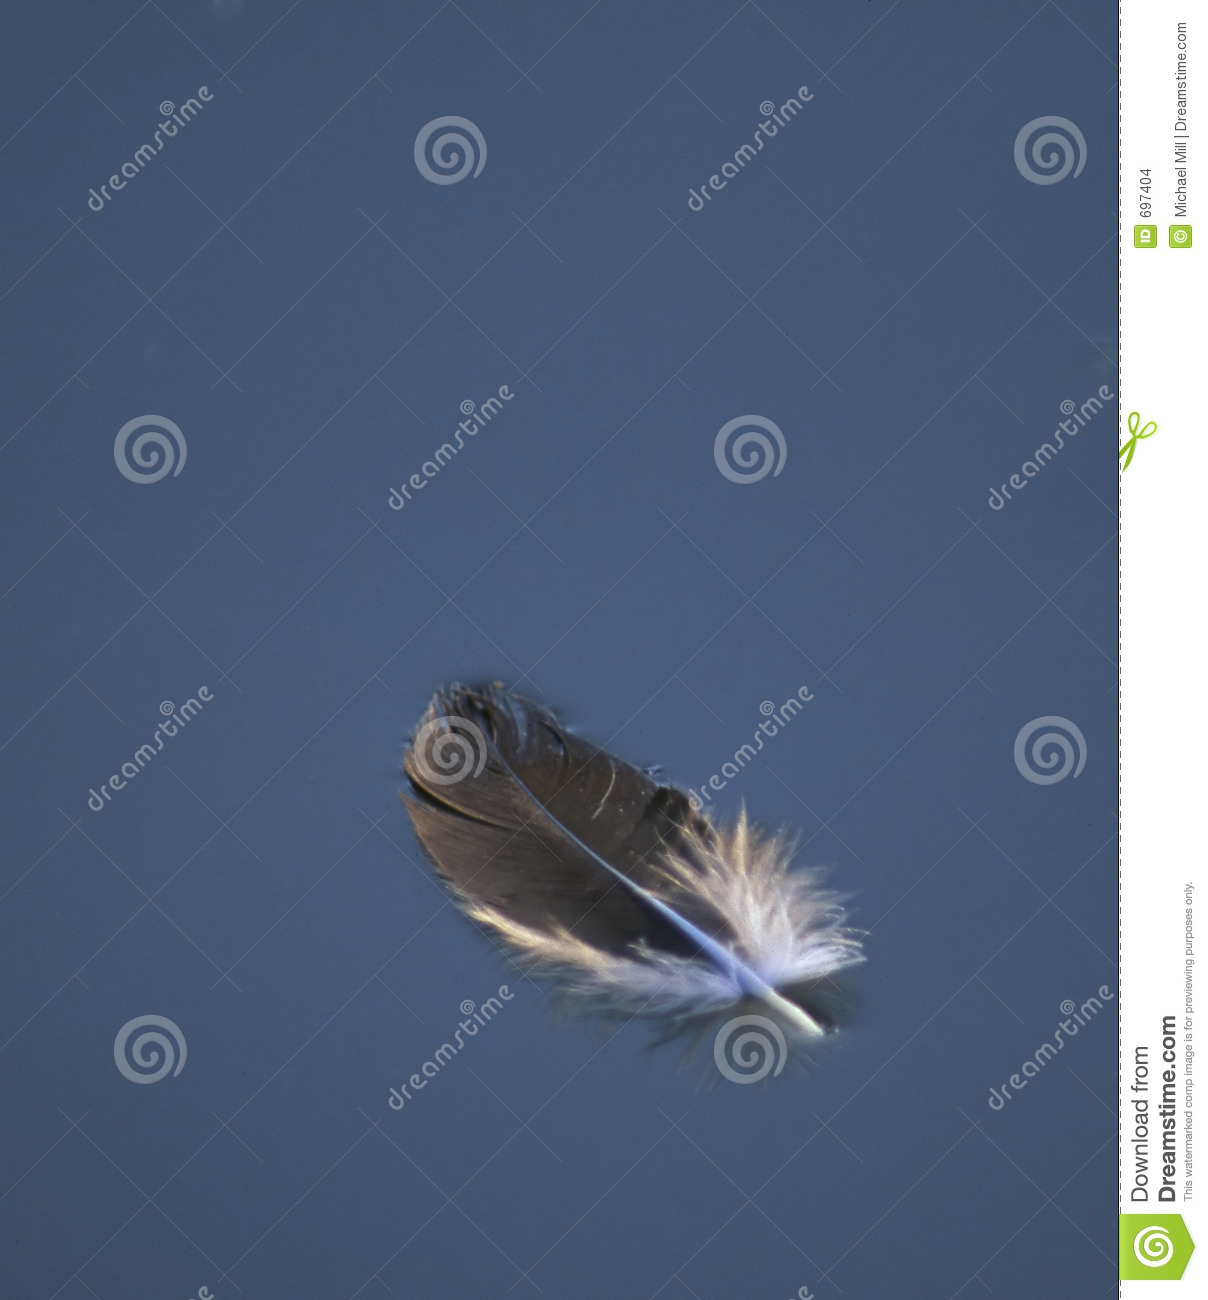 Floating Feather Stock Images   Image  697404